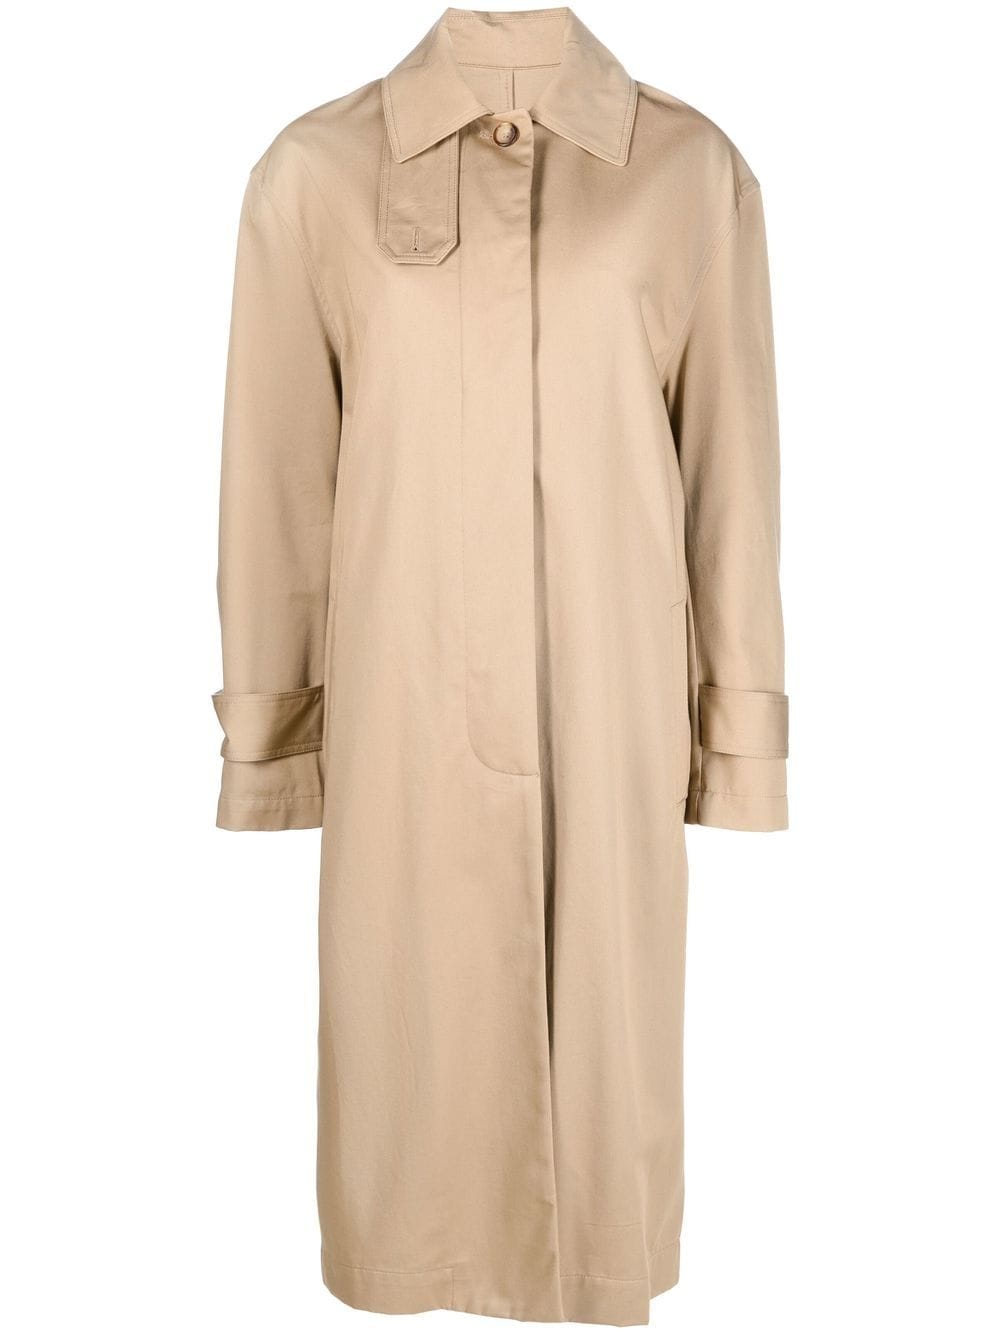 stand-up collar trench coat